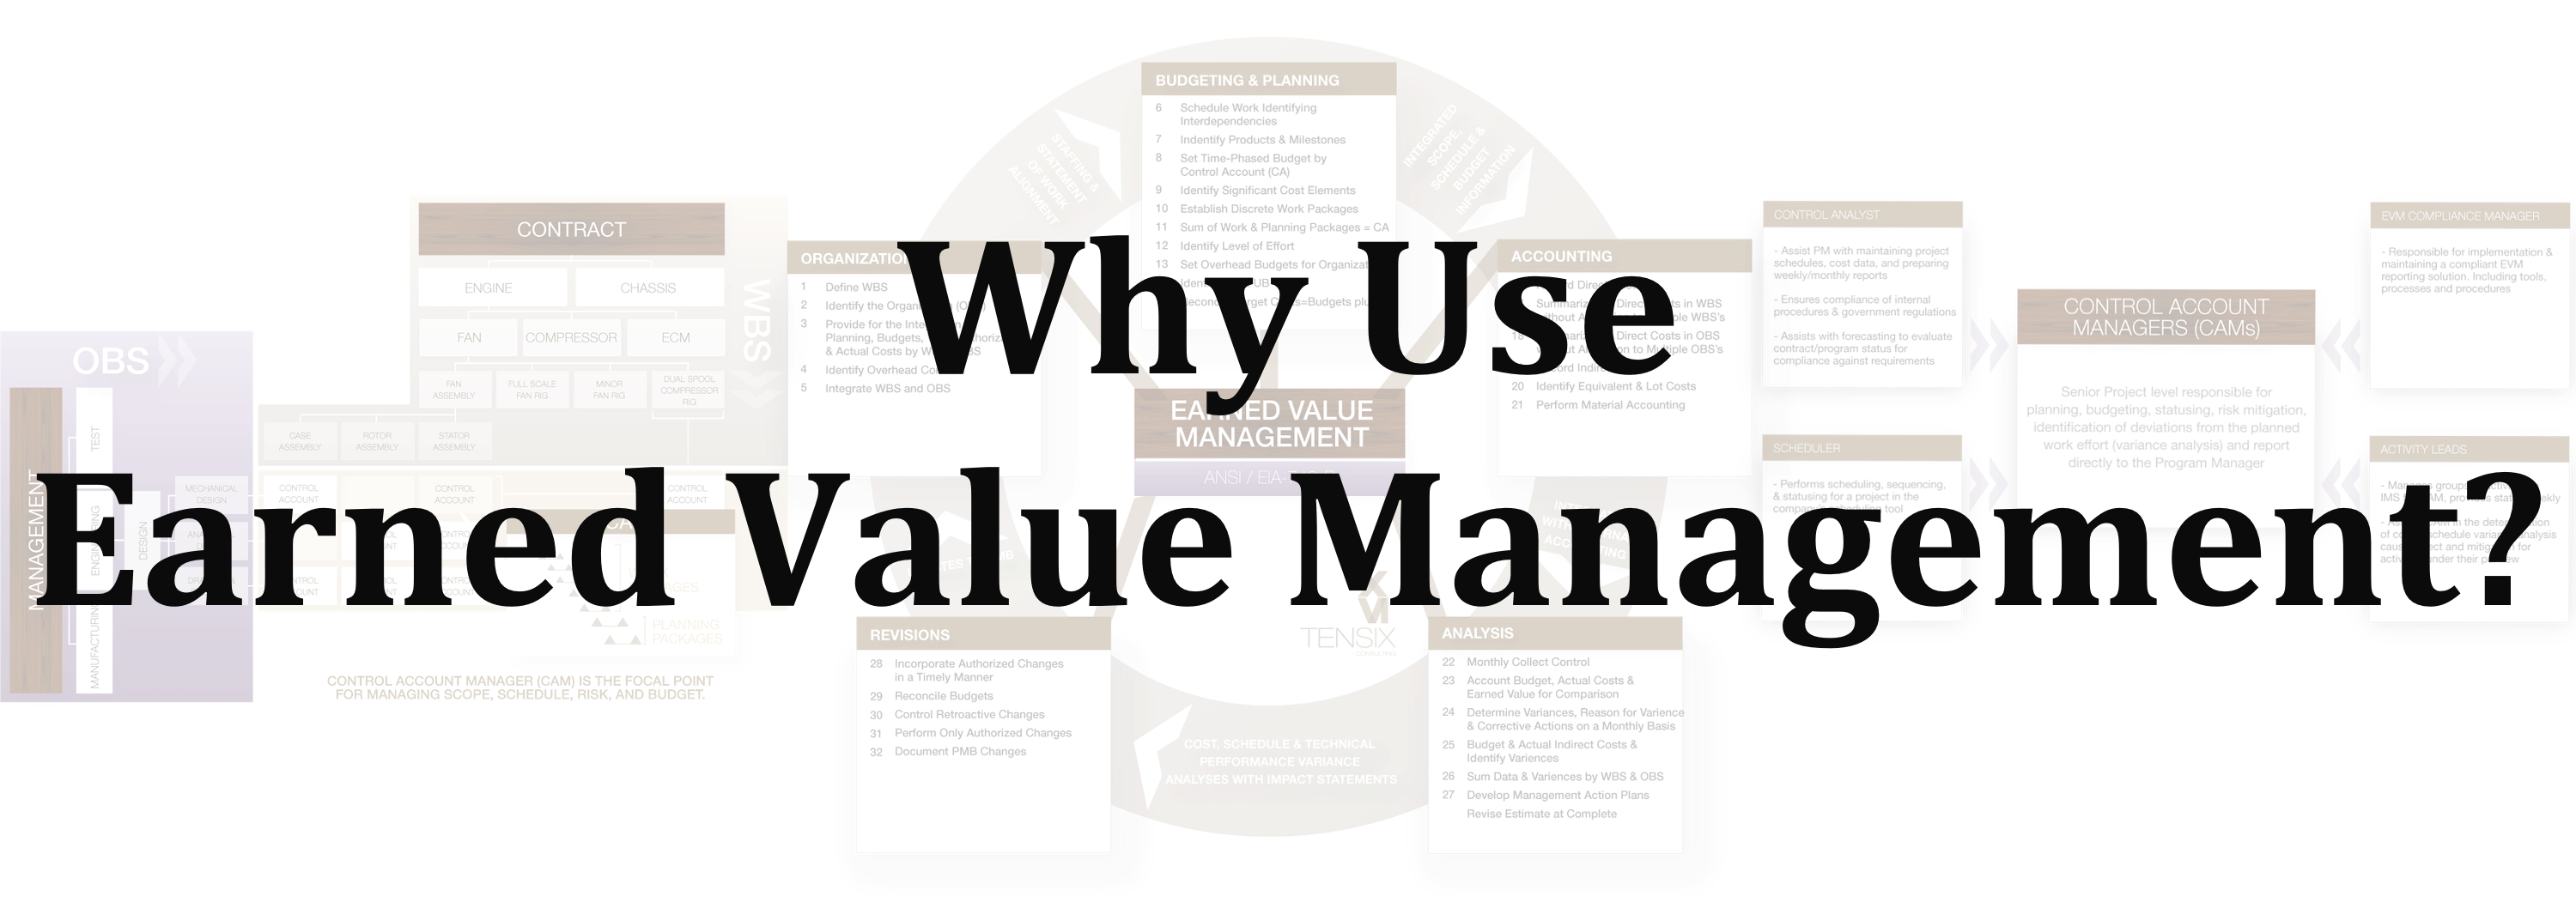 EVM - Why Use Earned Value Management